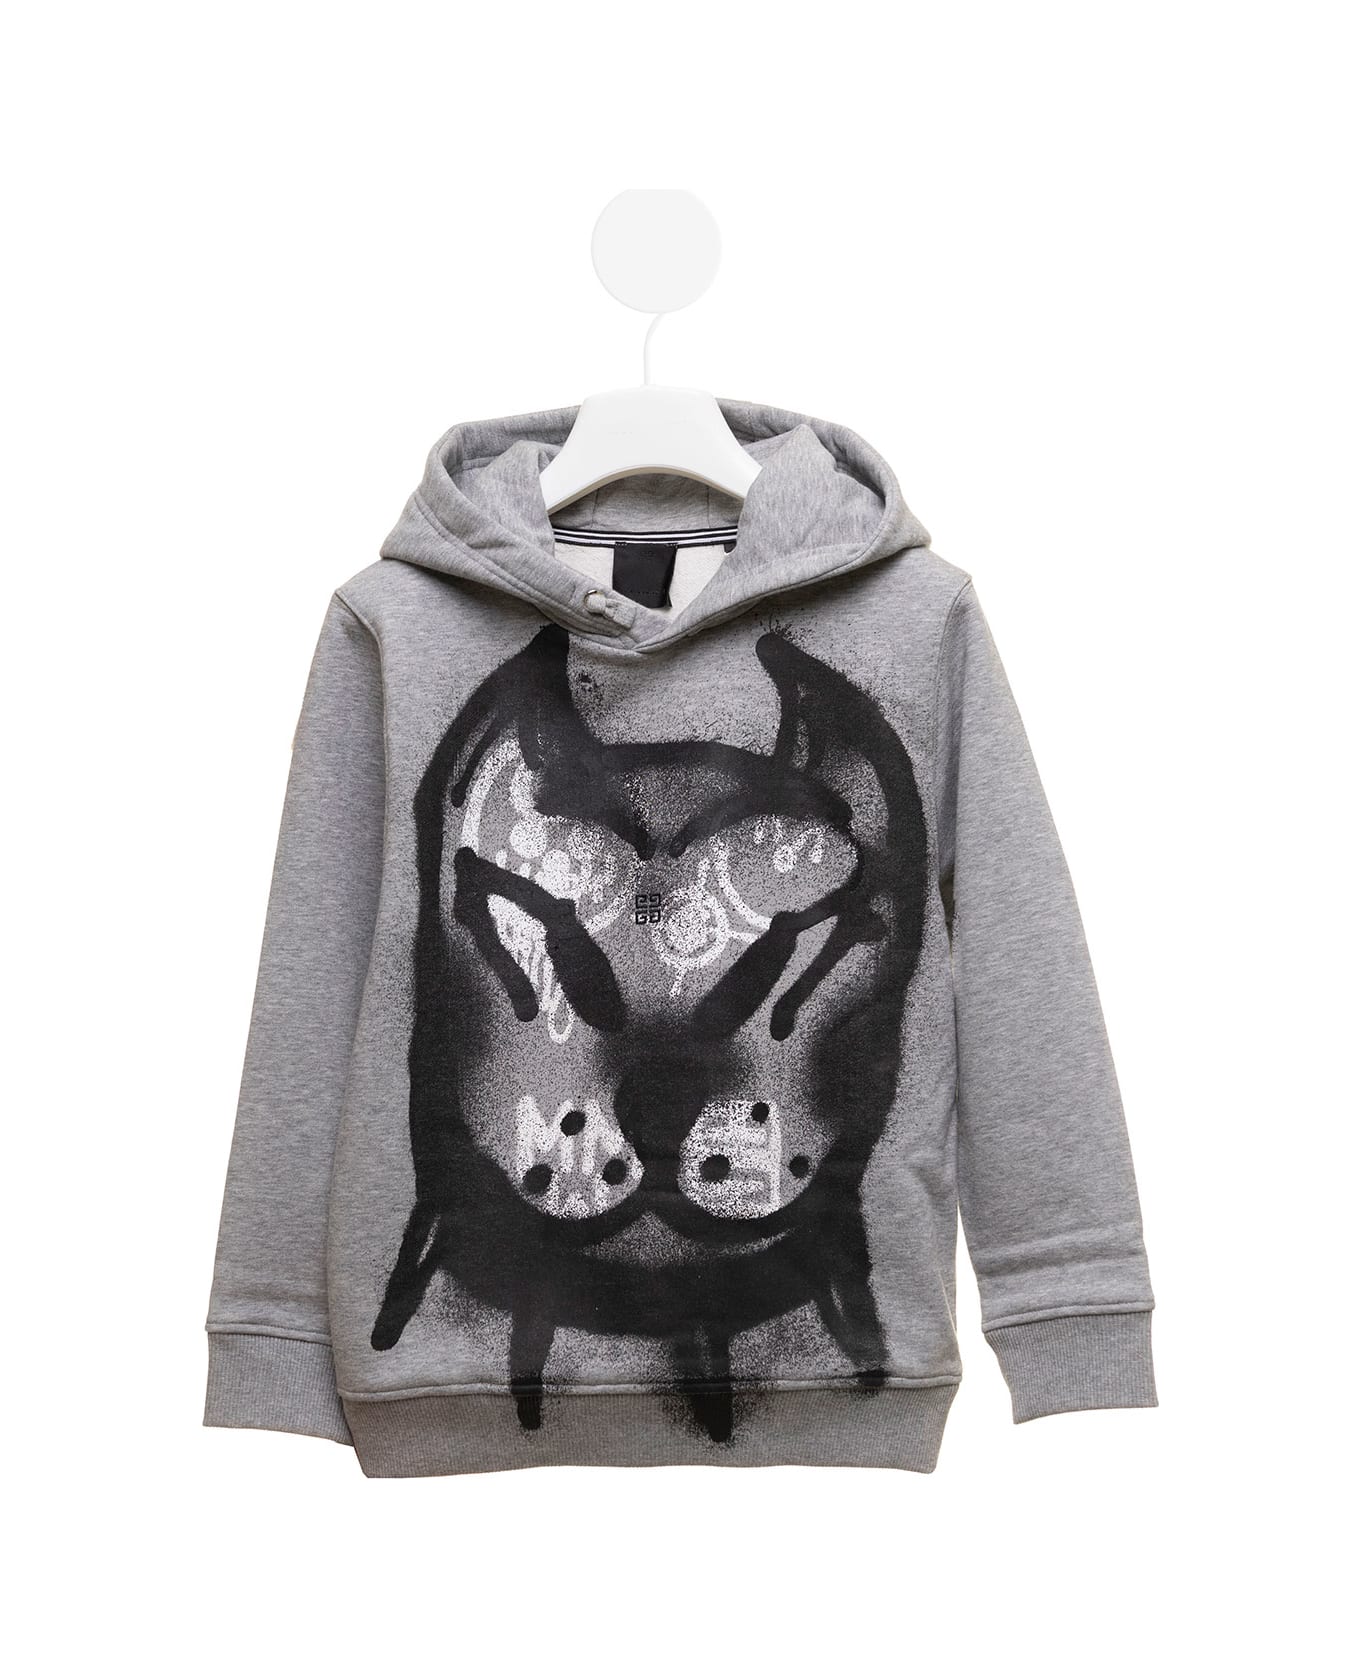 Givenchy Grey Jersey Hoodie With Graffiti Front Print Givenchy Kids Boy - Grey